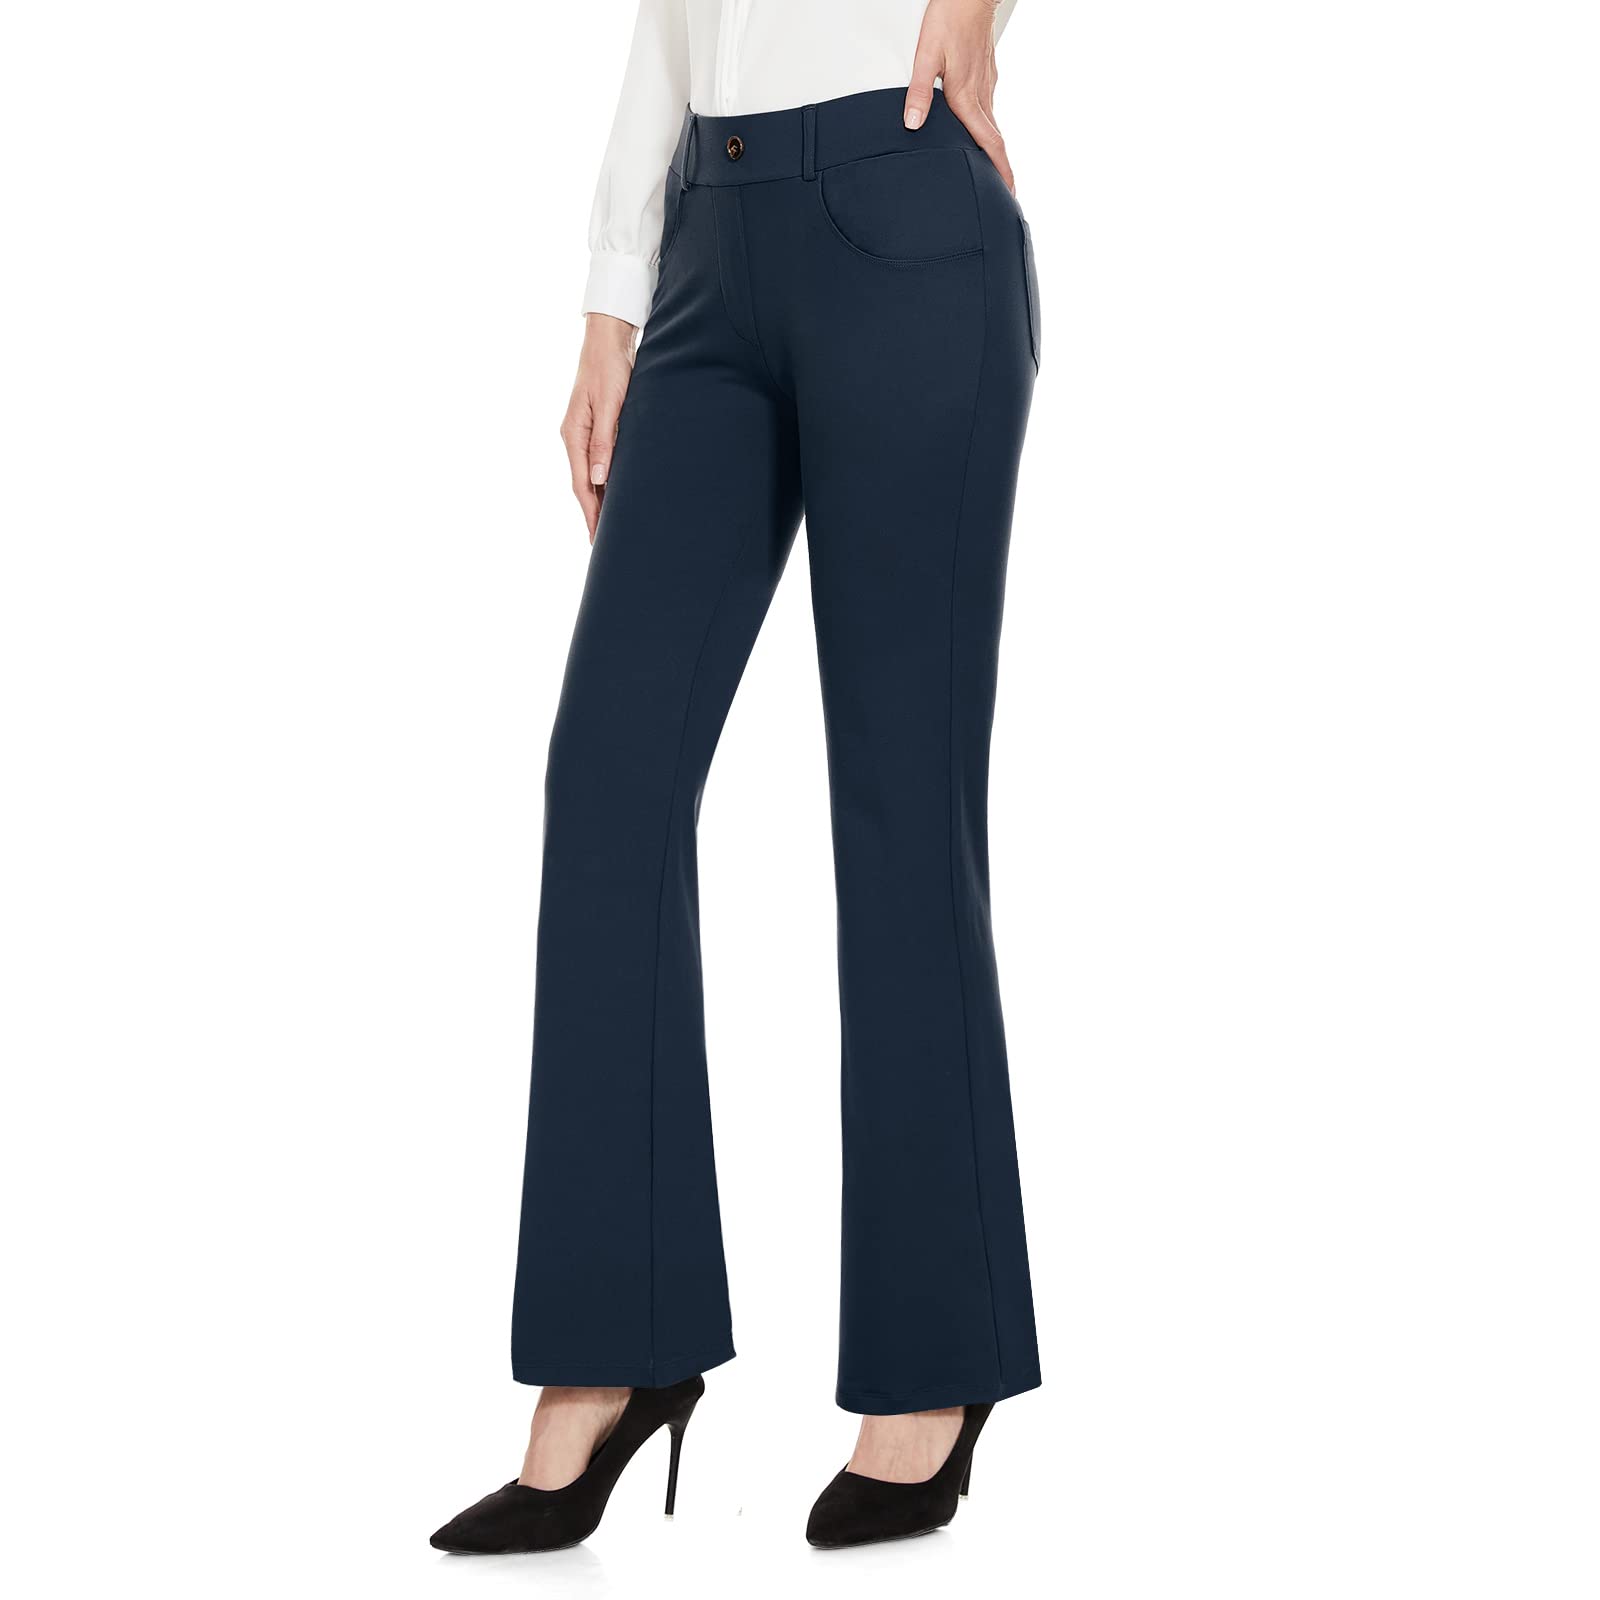 Work Pants for Women - Blue - Size 16